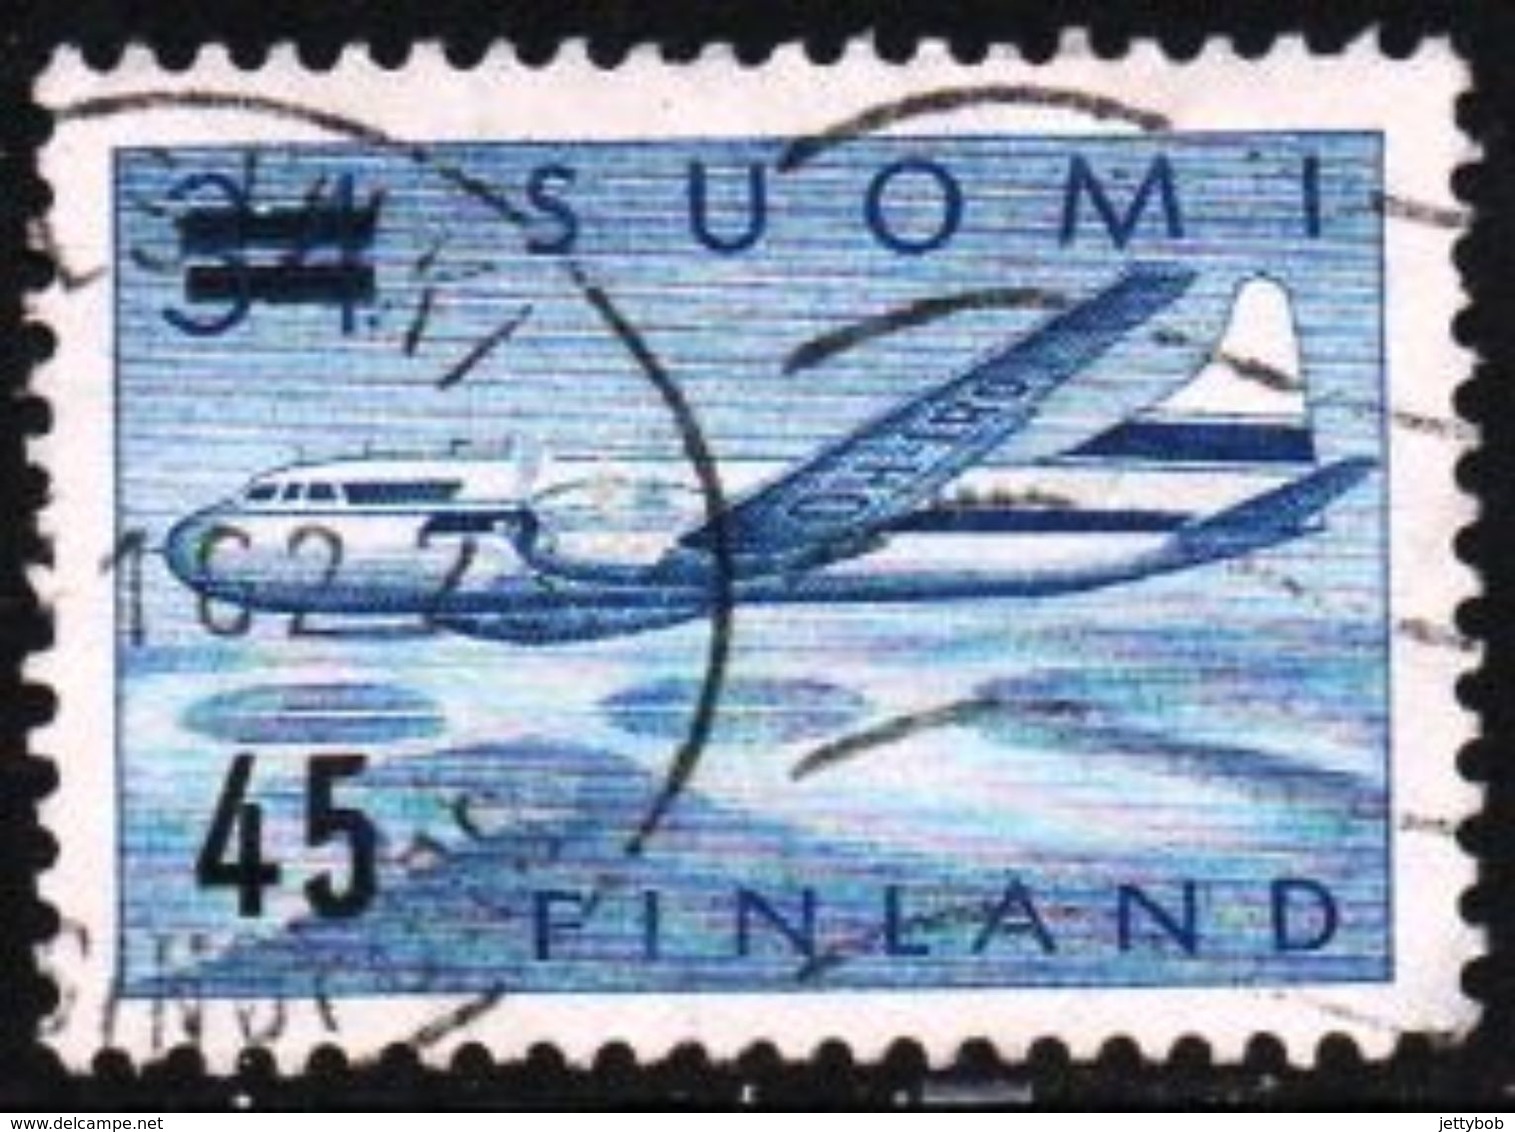 FINLAND 1959 AIR 45m/34m . Used - Used Stamps